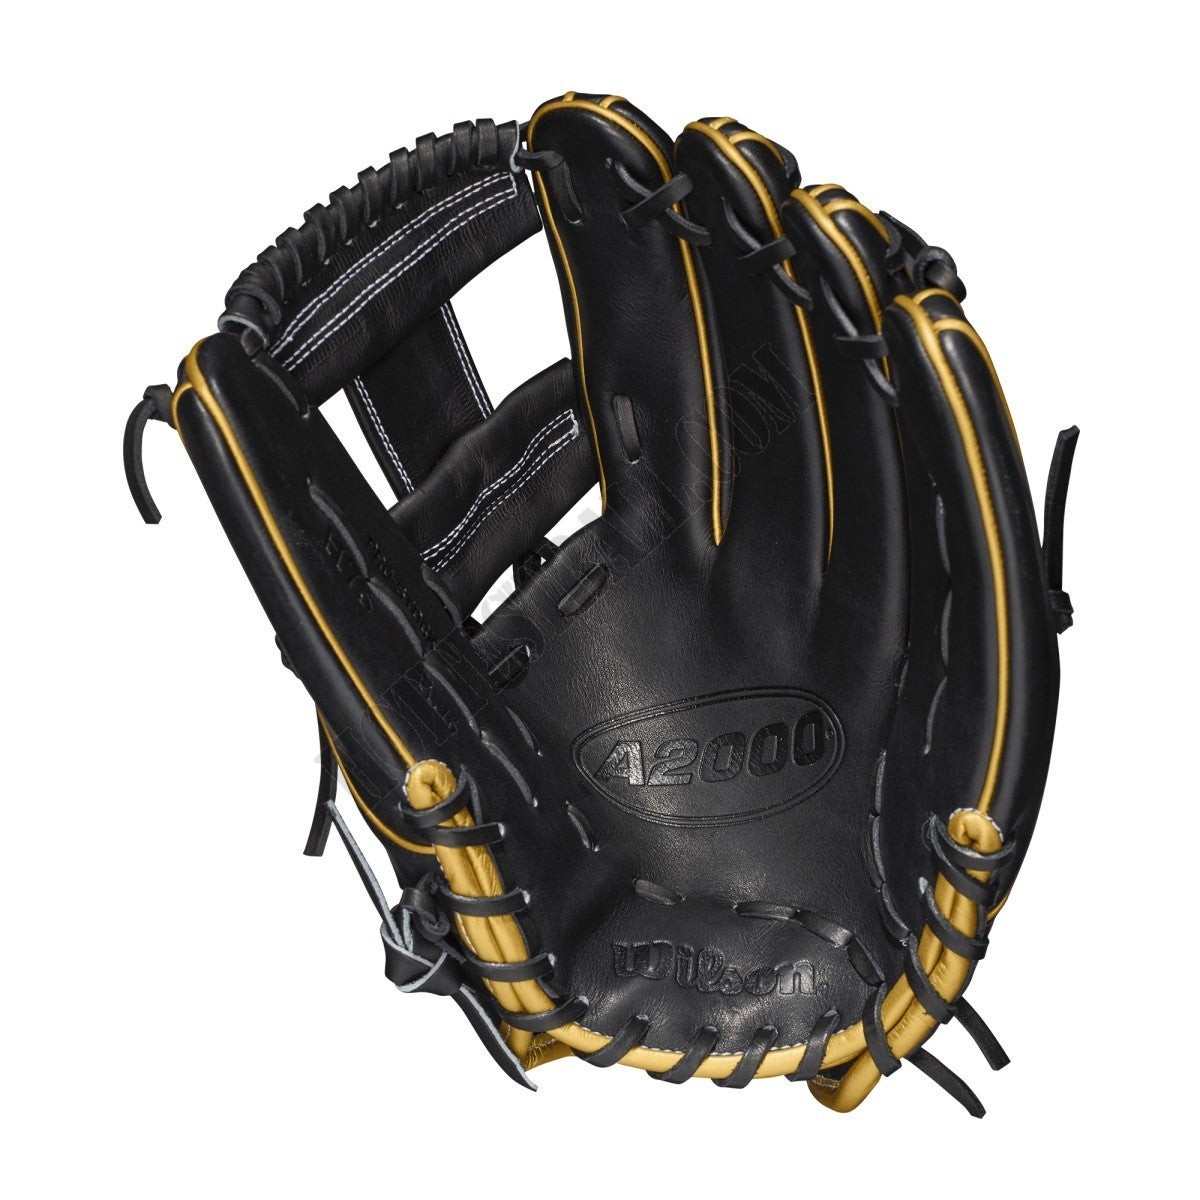 2021 A2000 H75 11.75" Infield Fastpitch Glove ● Wilson Promotions - -2